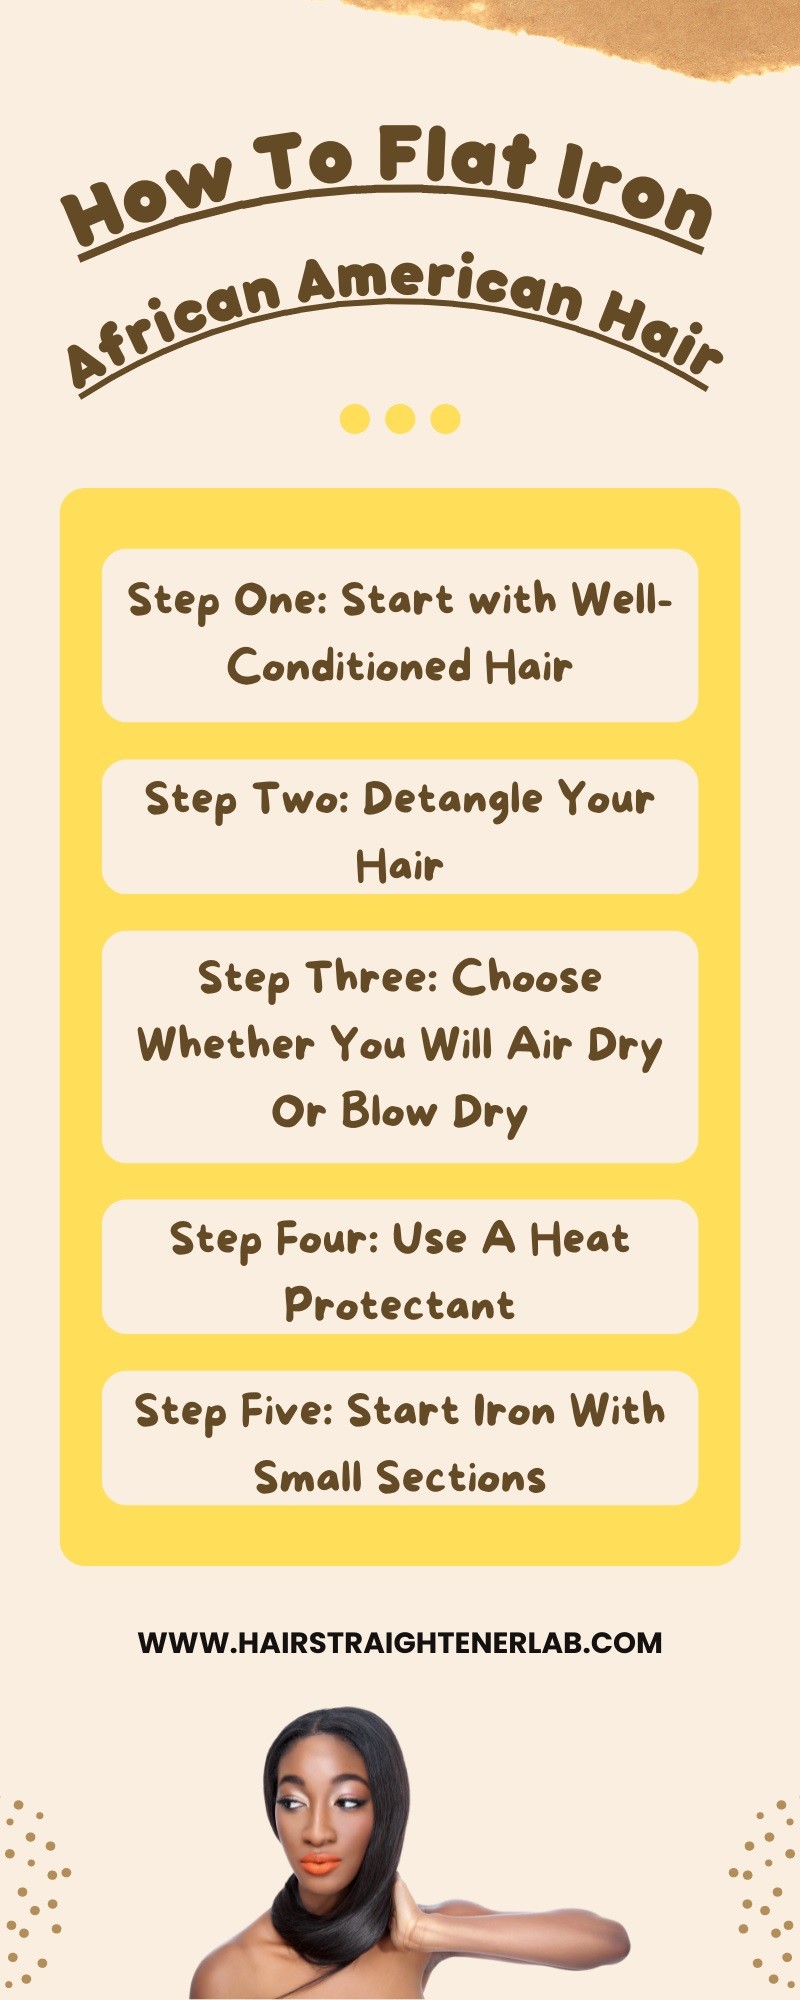 How To Flat Iron African American Hair